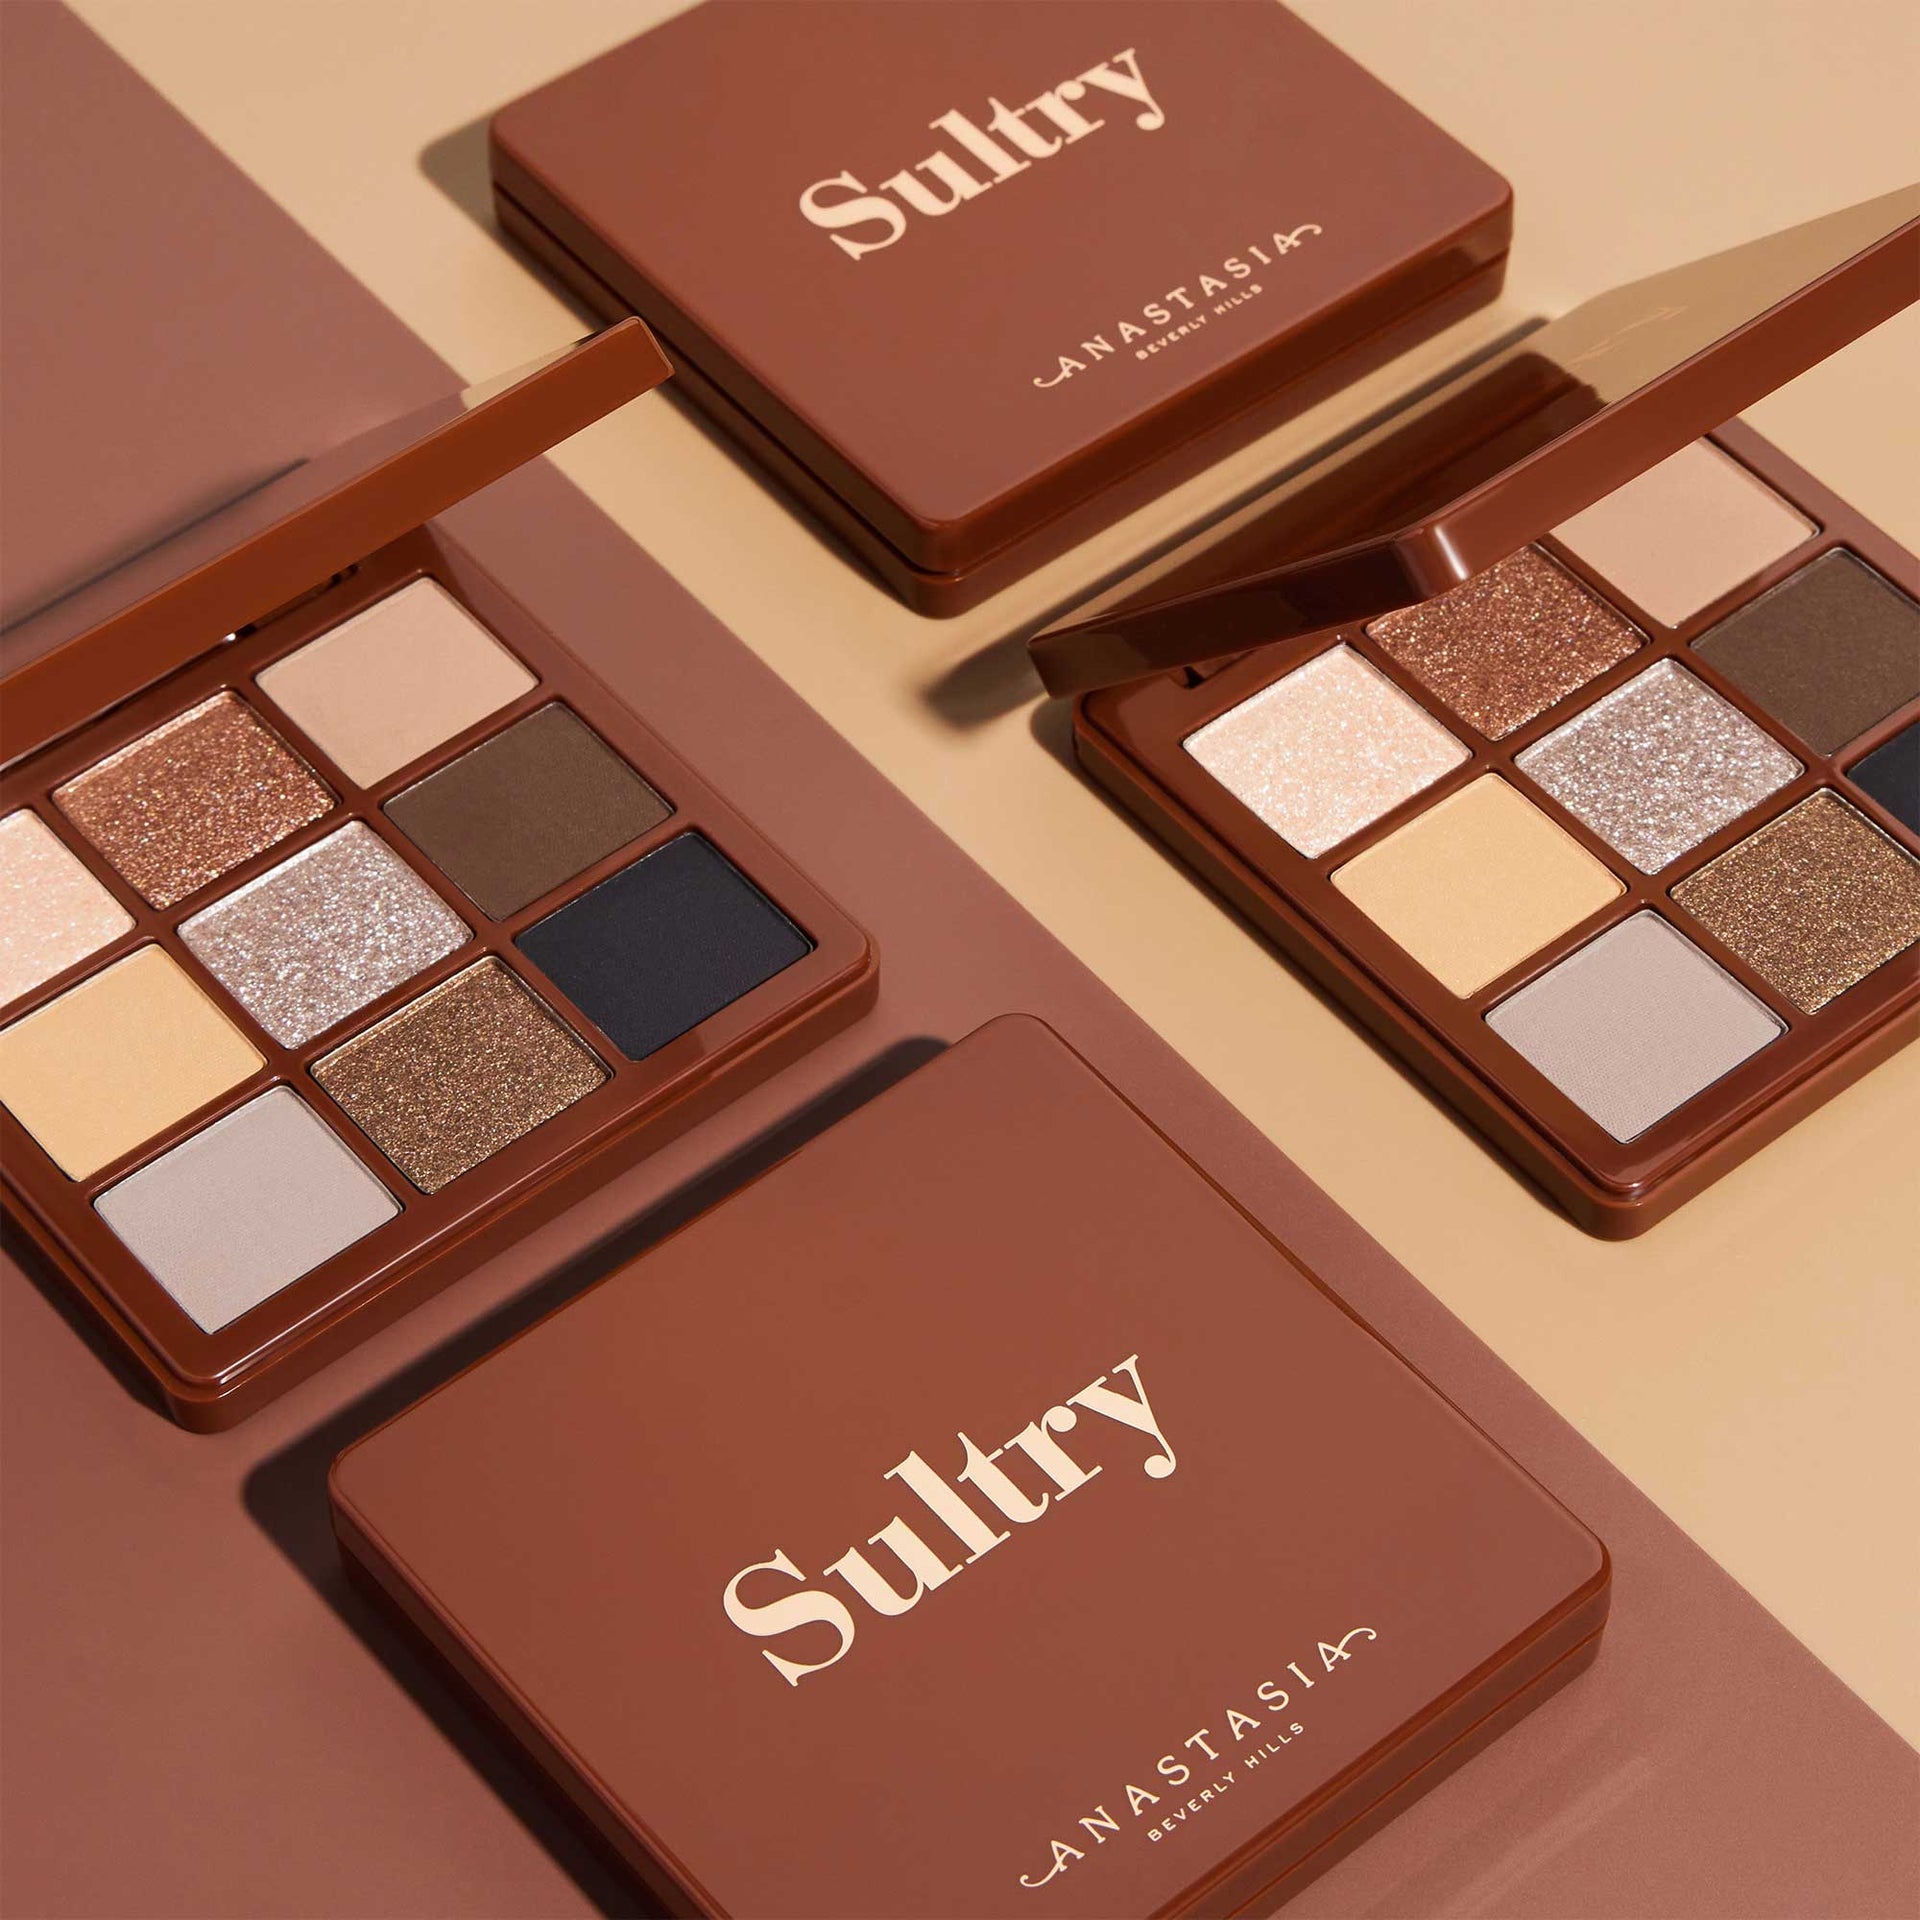 Deluxe Mini Sultry Palette Stylized Image